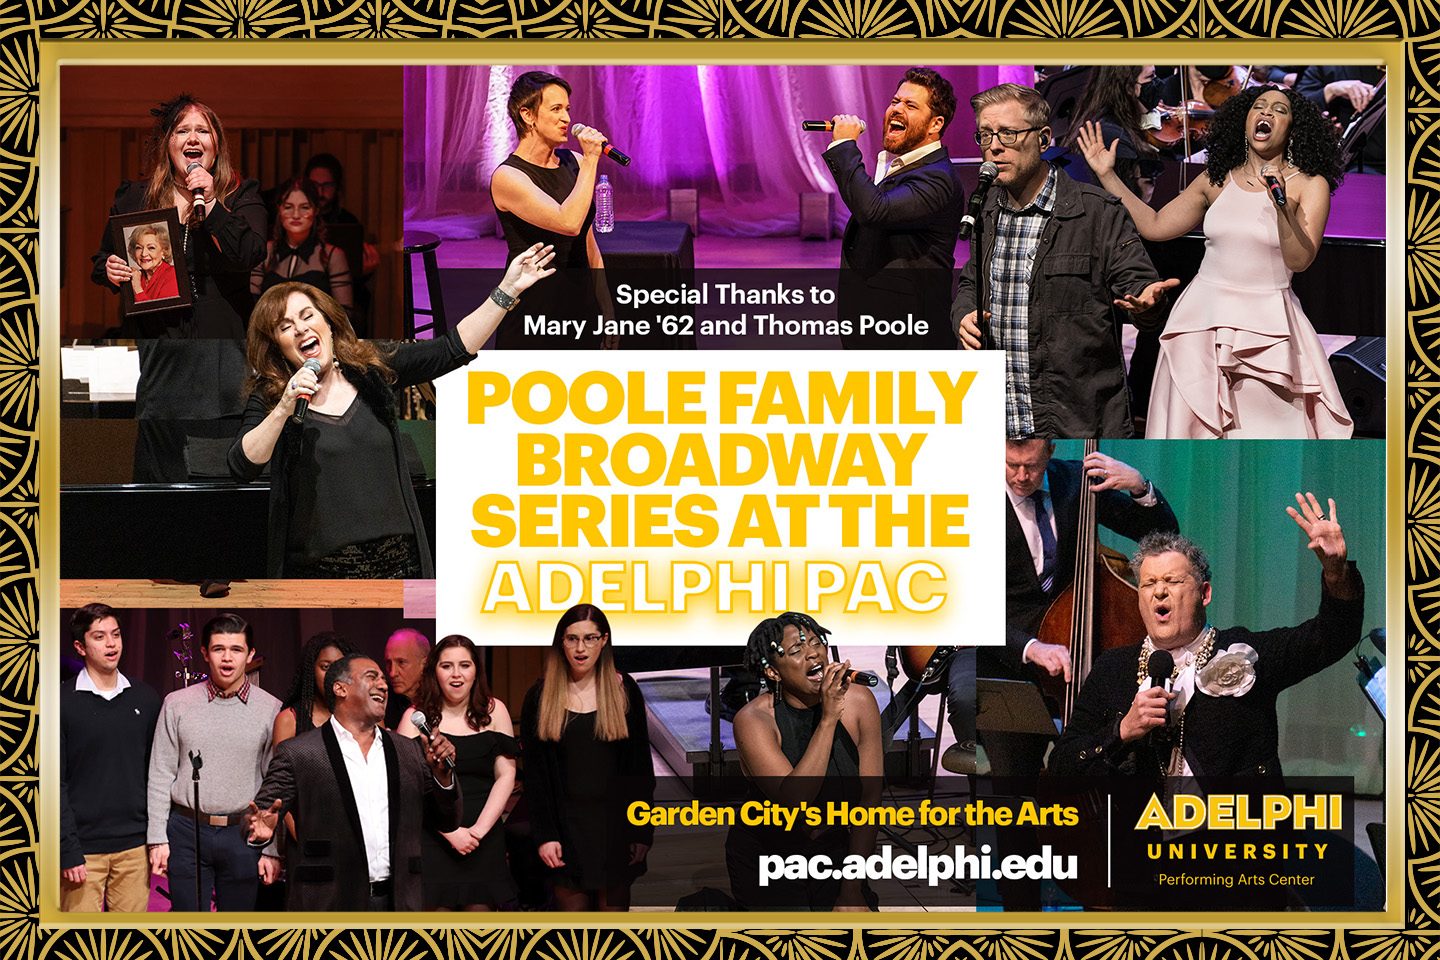 The Poole Family Broadway Series at the Adelphi PAC - Garden City's Home for the Arts